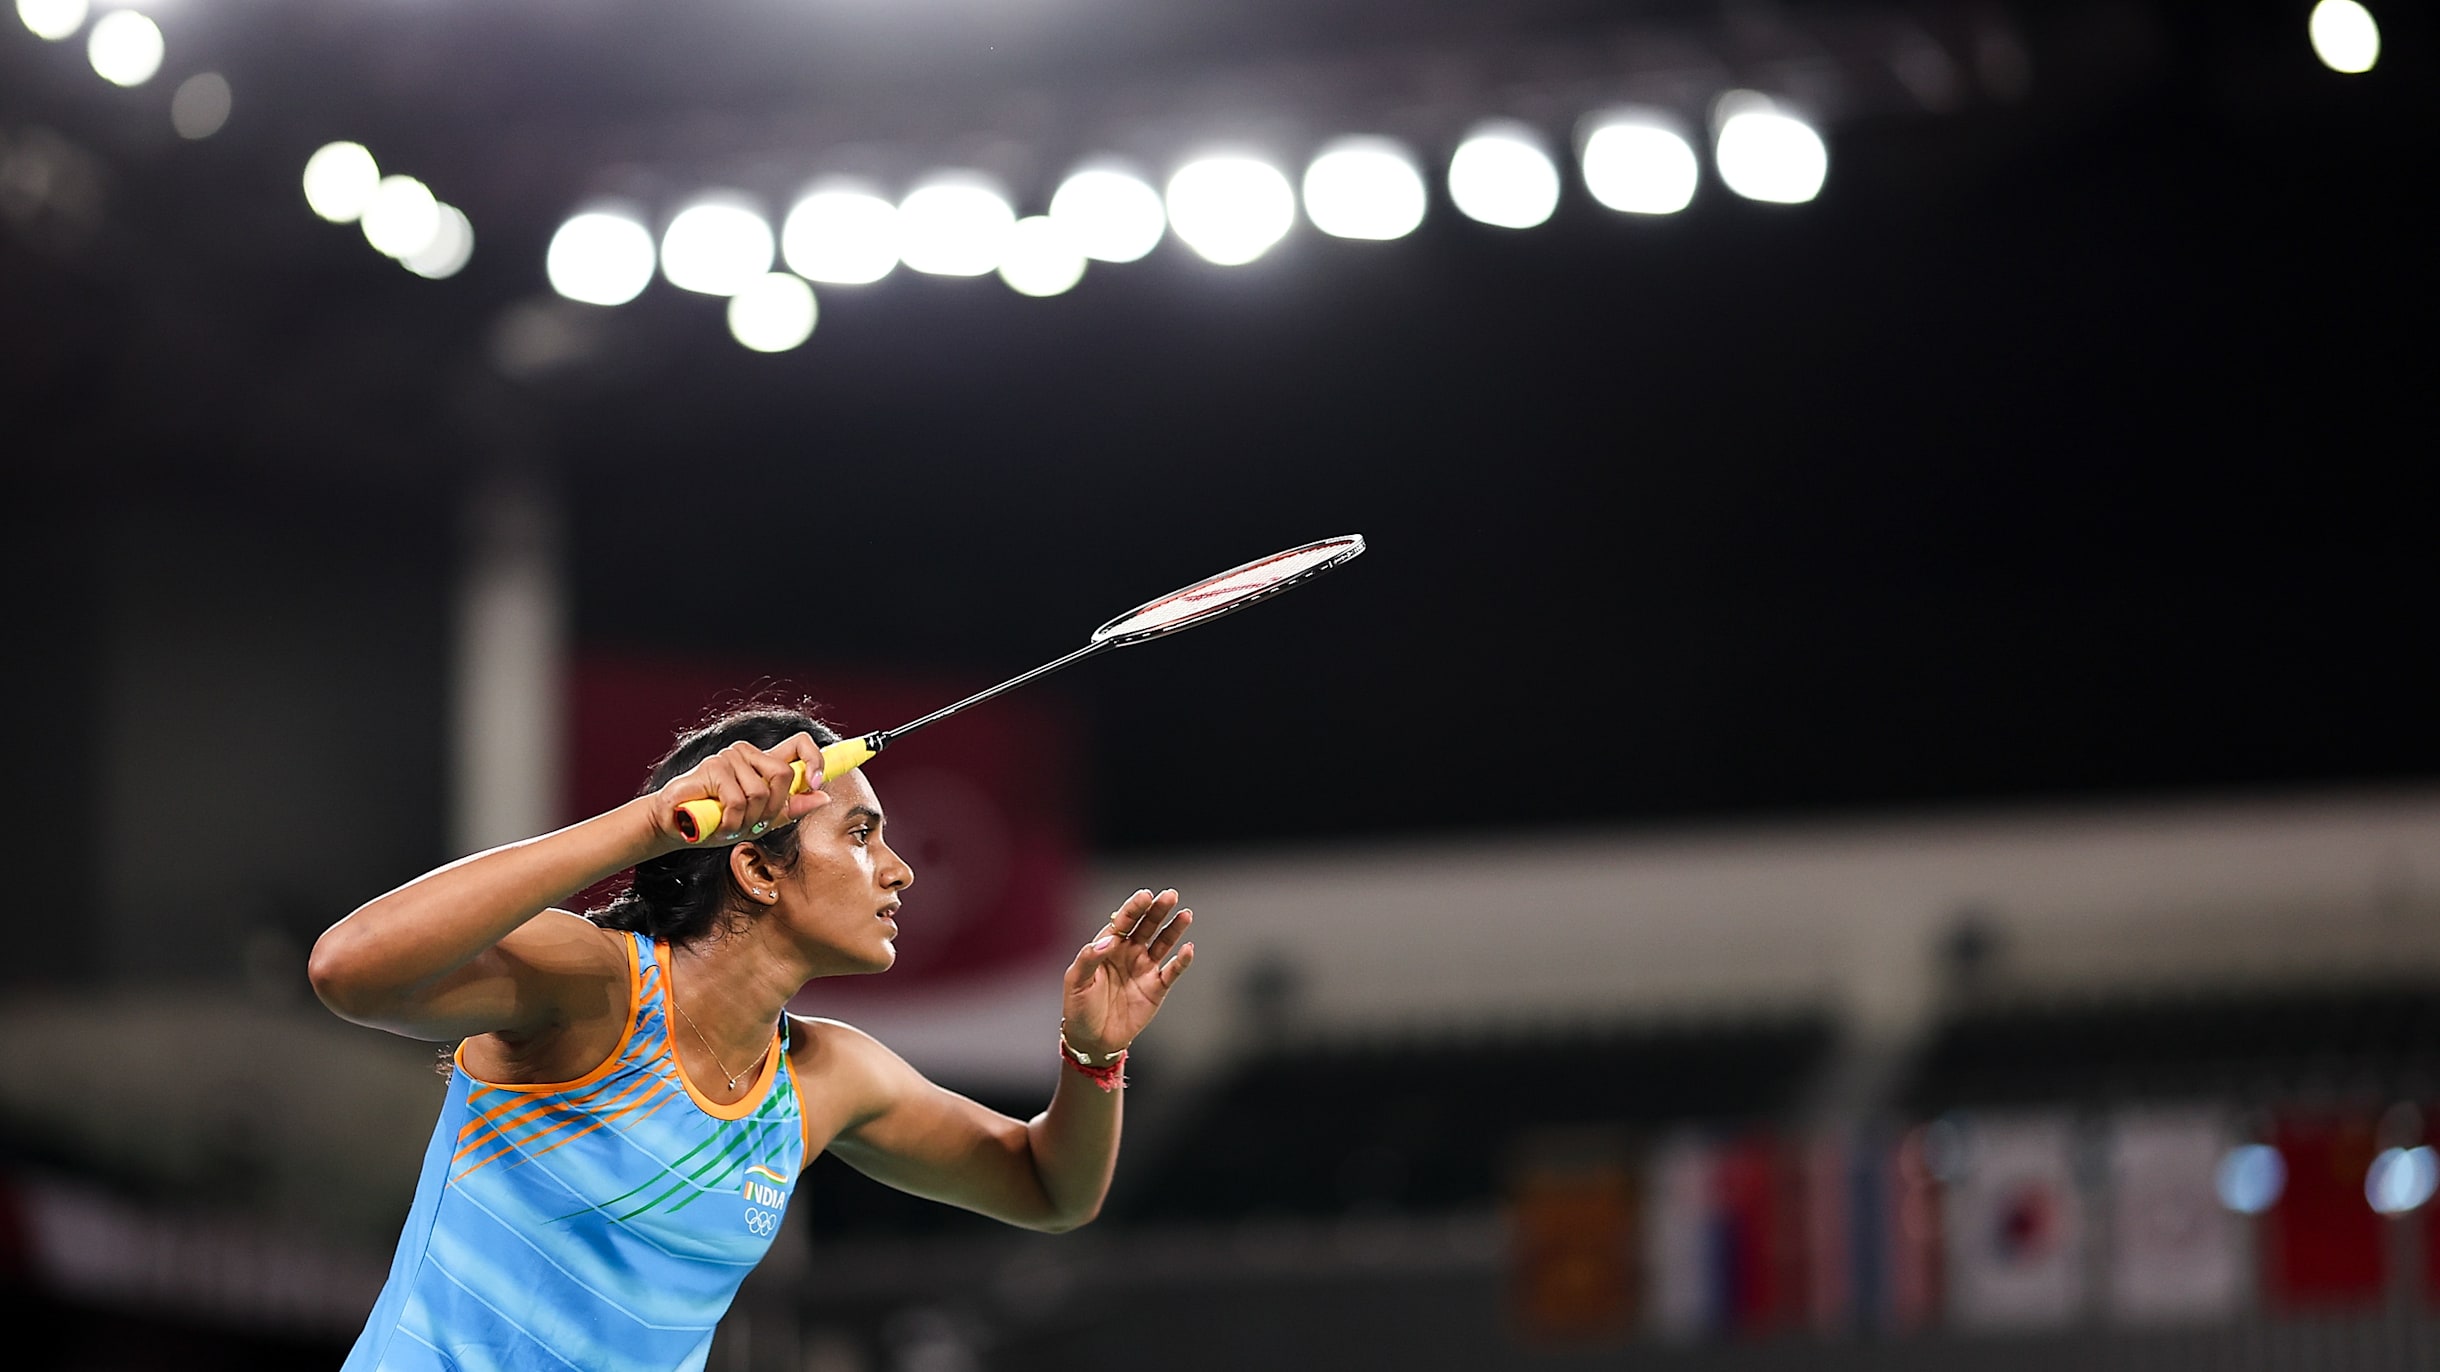 Indonesia Open 2021 PV Sindhu, Kidambi Srikanth in action, watch live streaming and telecast in India